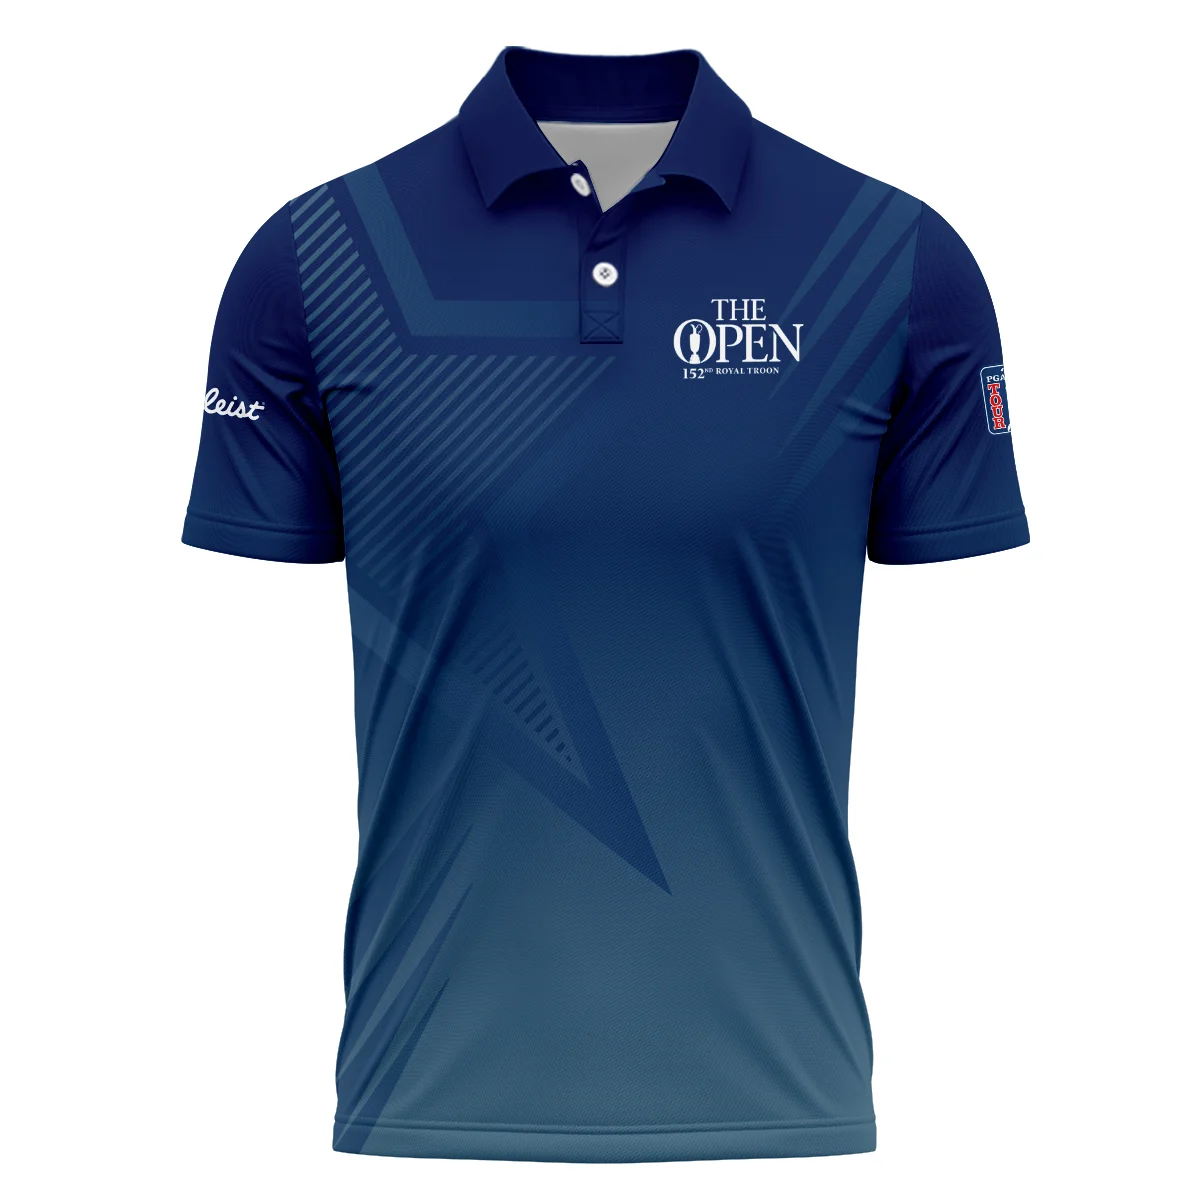 Titleist 152nd Open Championship Abstract Background Dark Blue Gradient Star Line Performance T-Shirt All Over Prints HOTOP260624A04TLTS